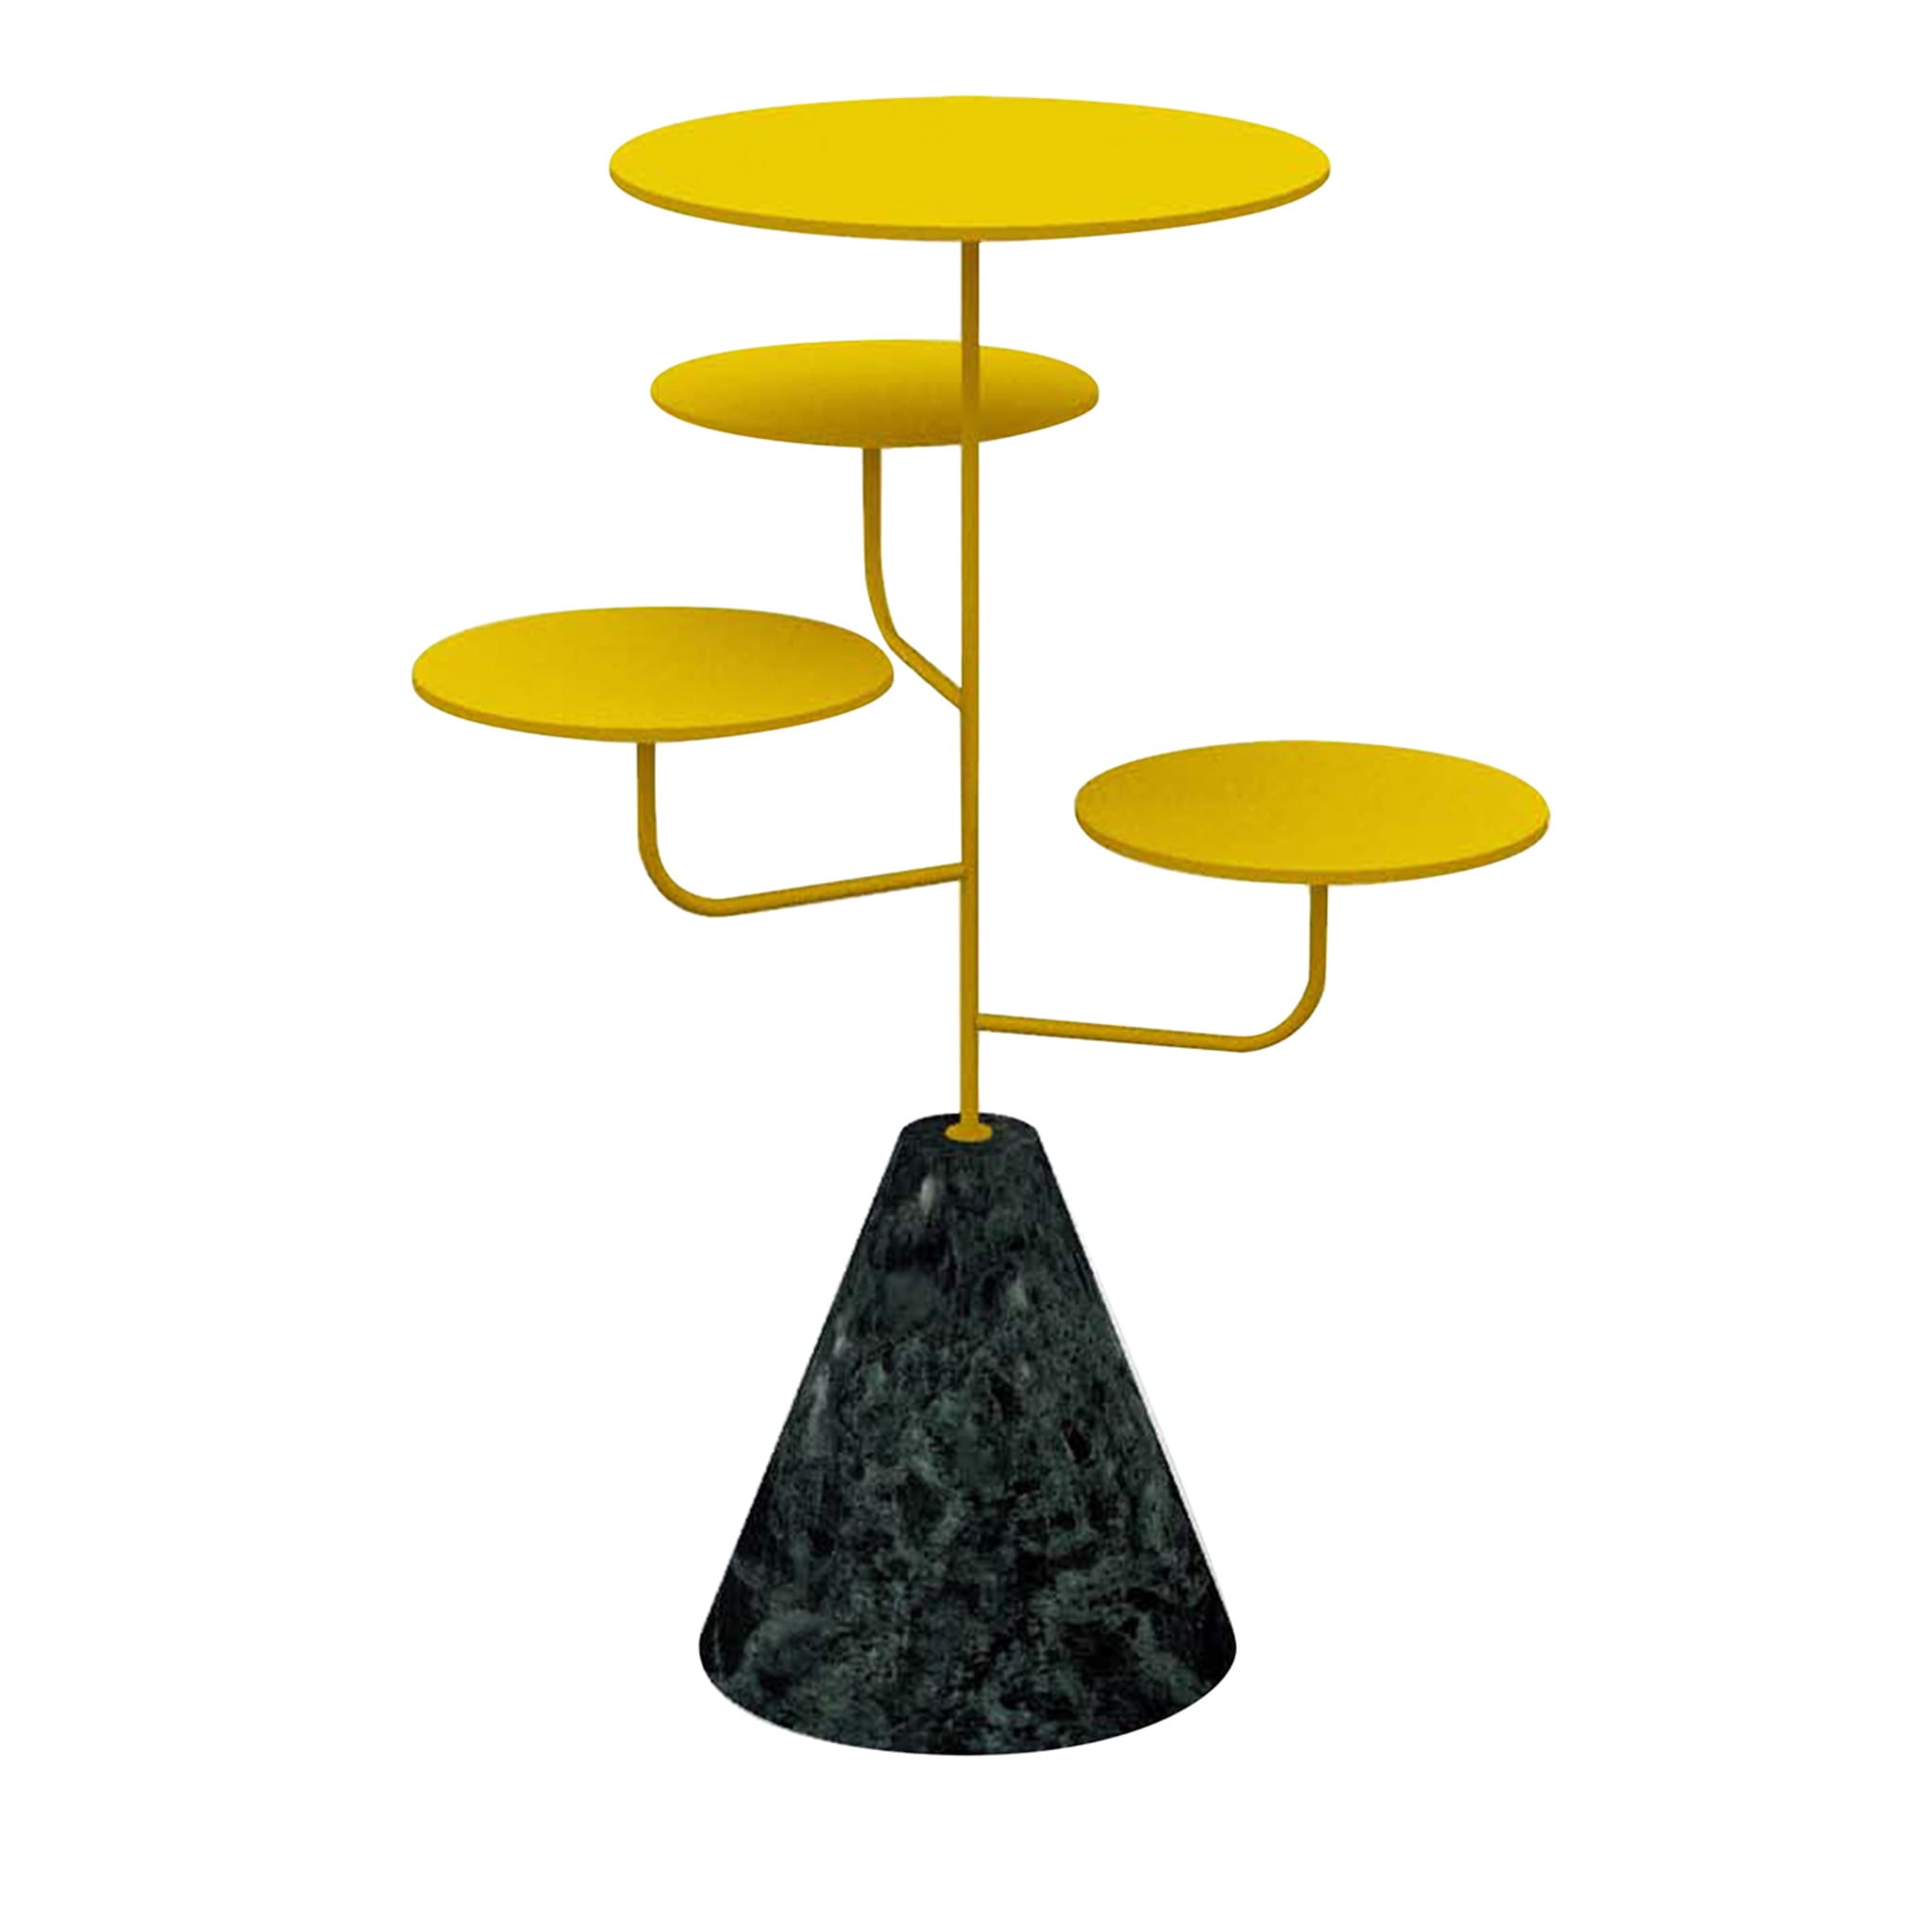 Condiviso 4-Tier Yellow/Green Guatemala Serving Stand - Main view